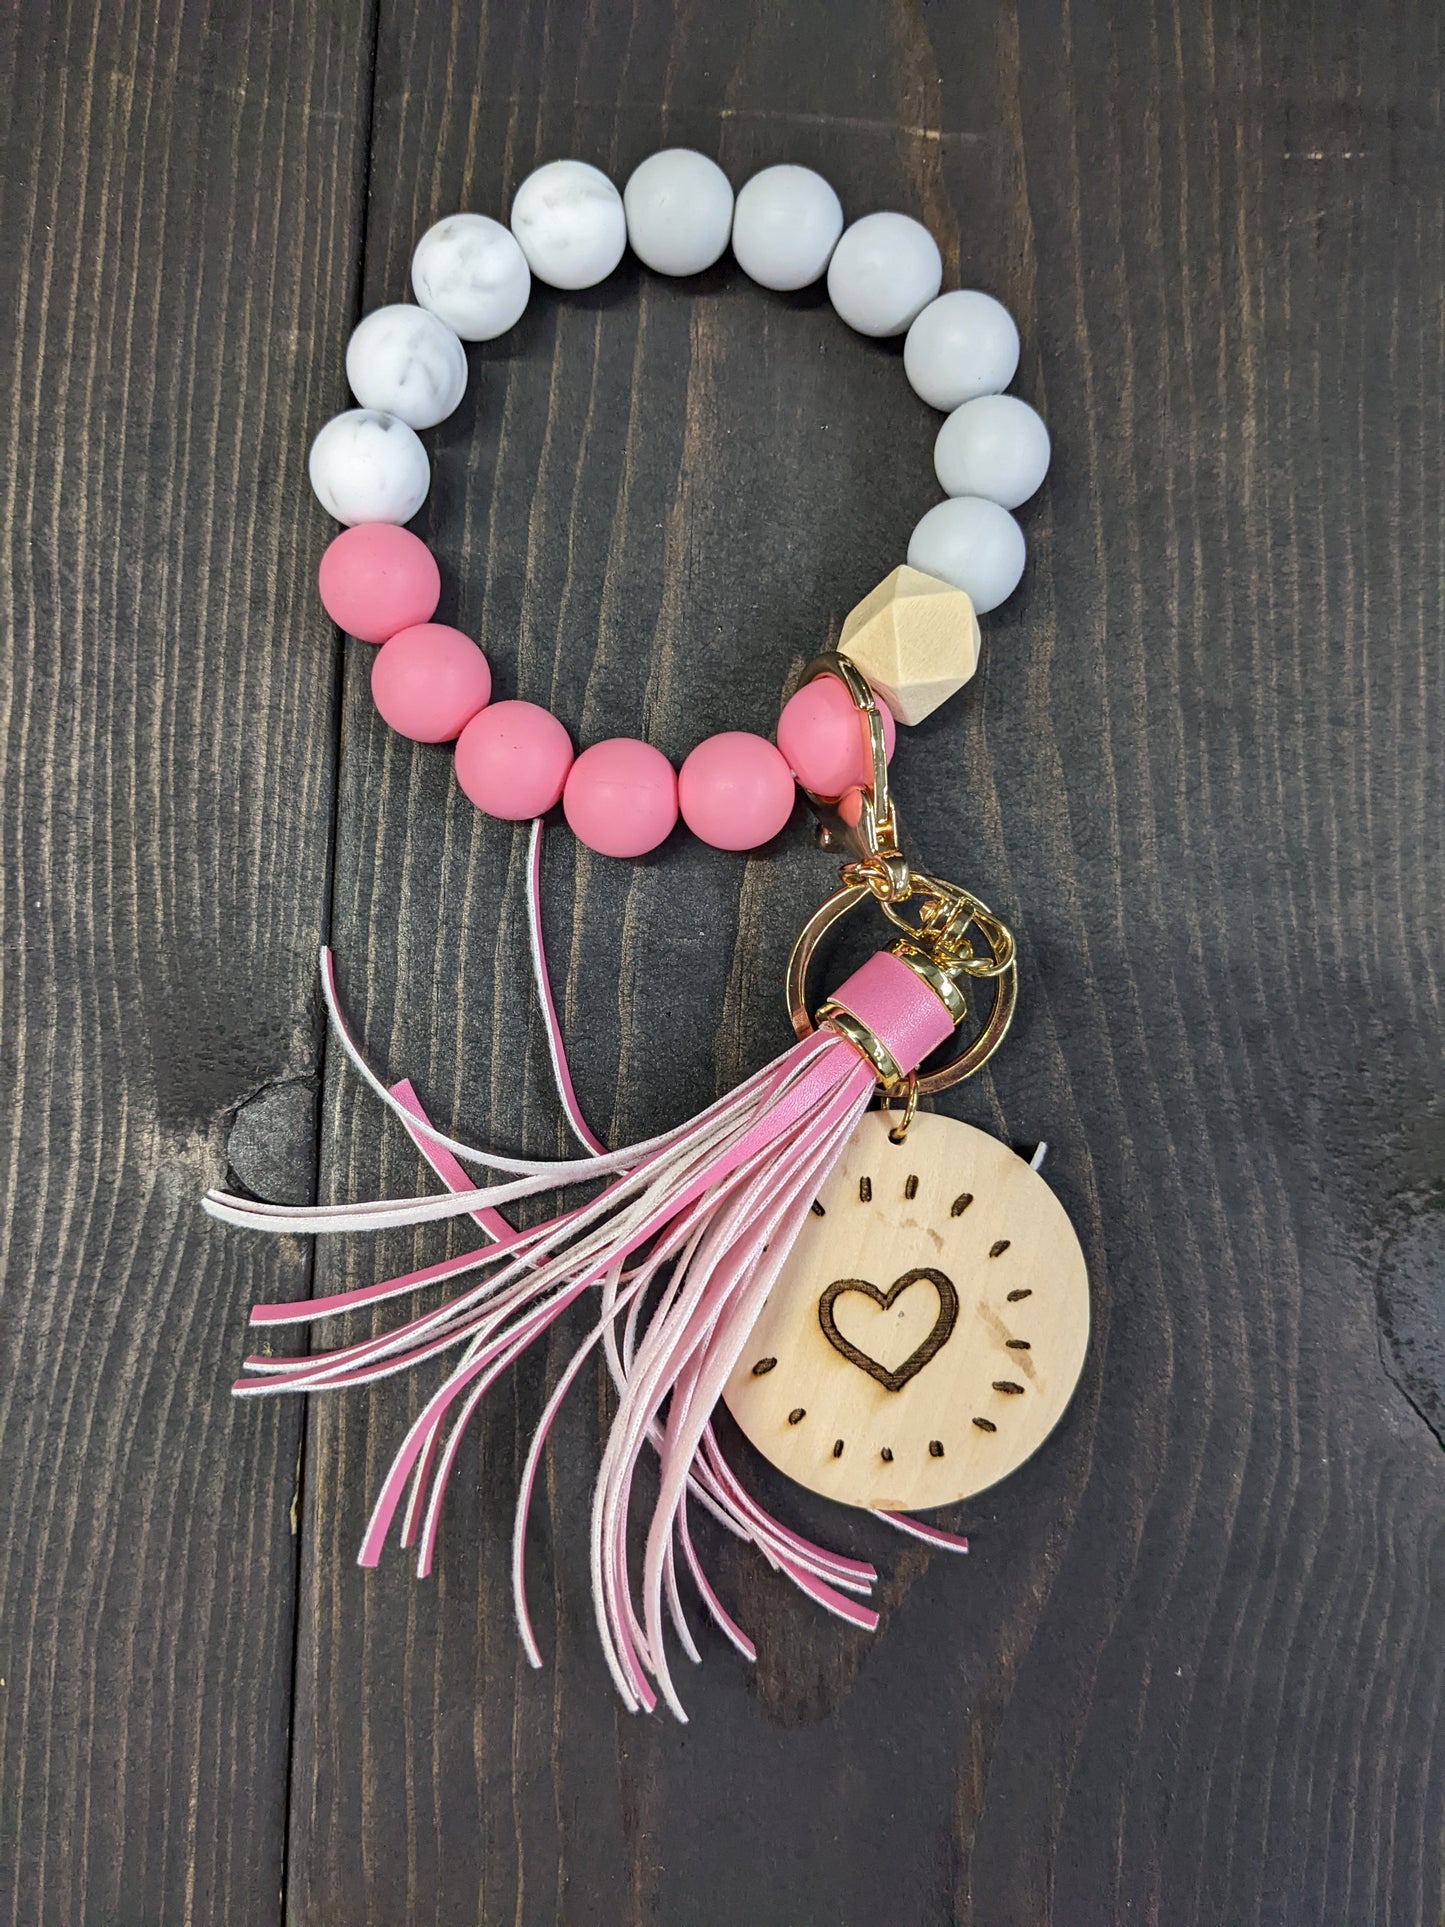 Key Chain wristlet- pink and grey with pink tassels with wood heart engraving